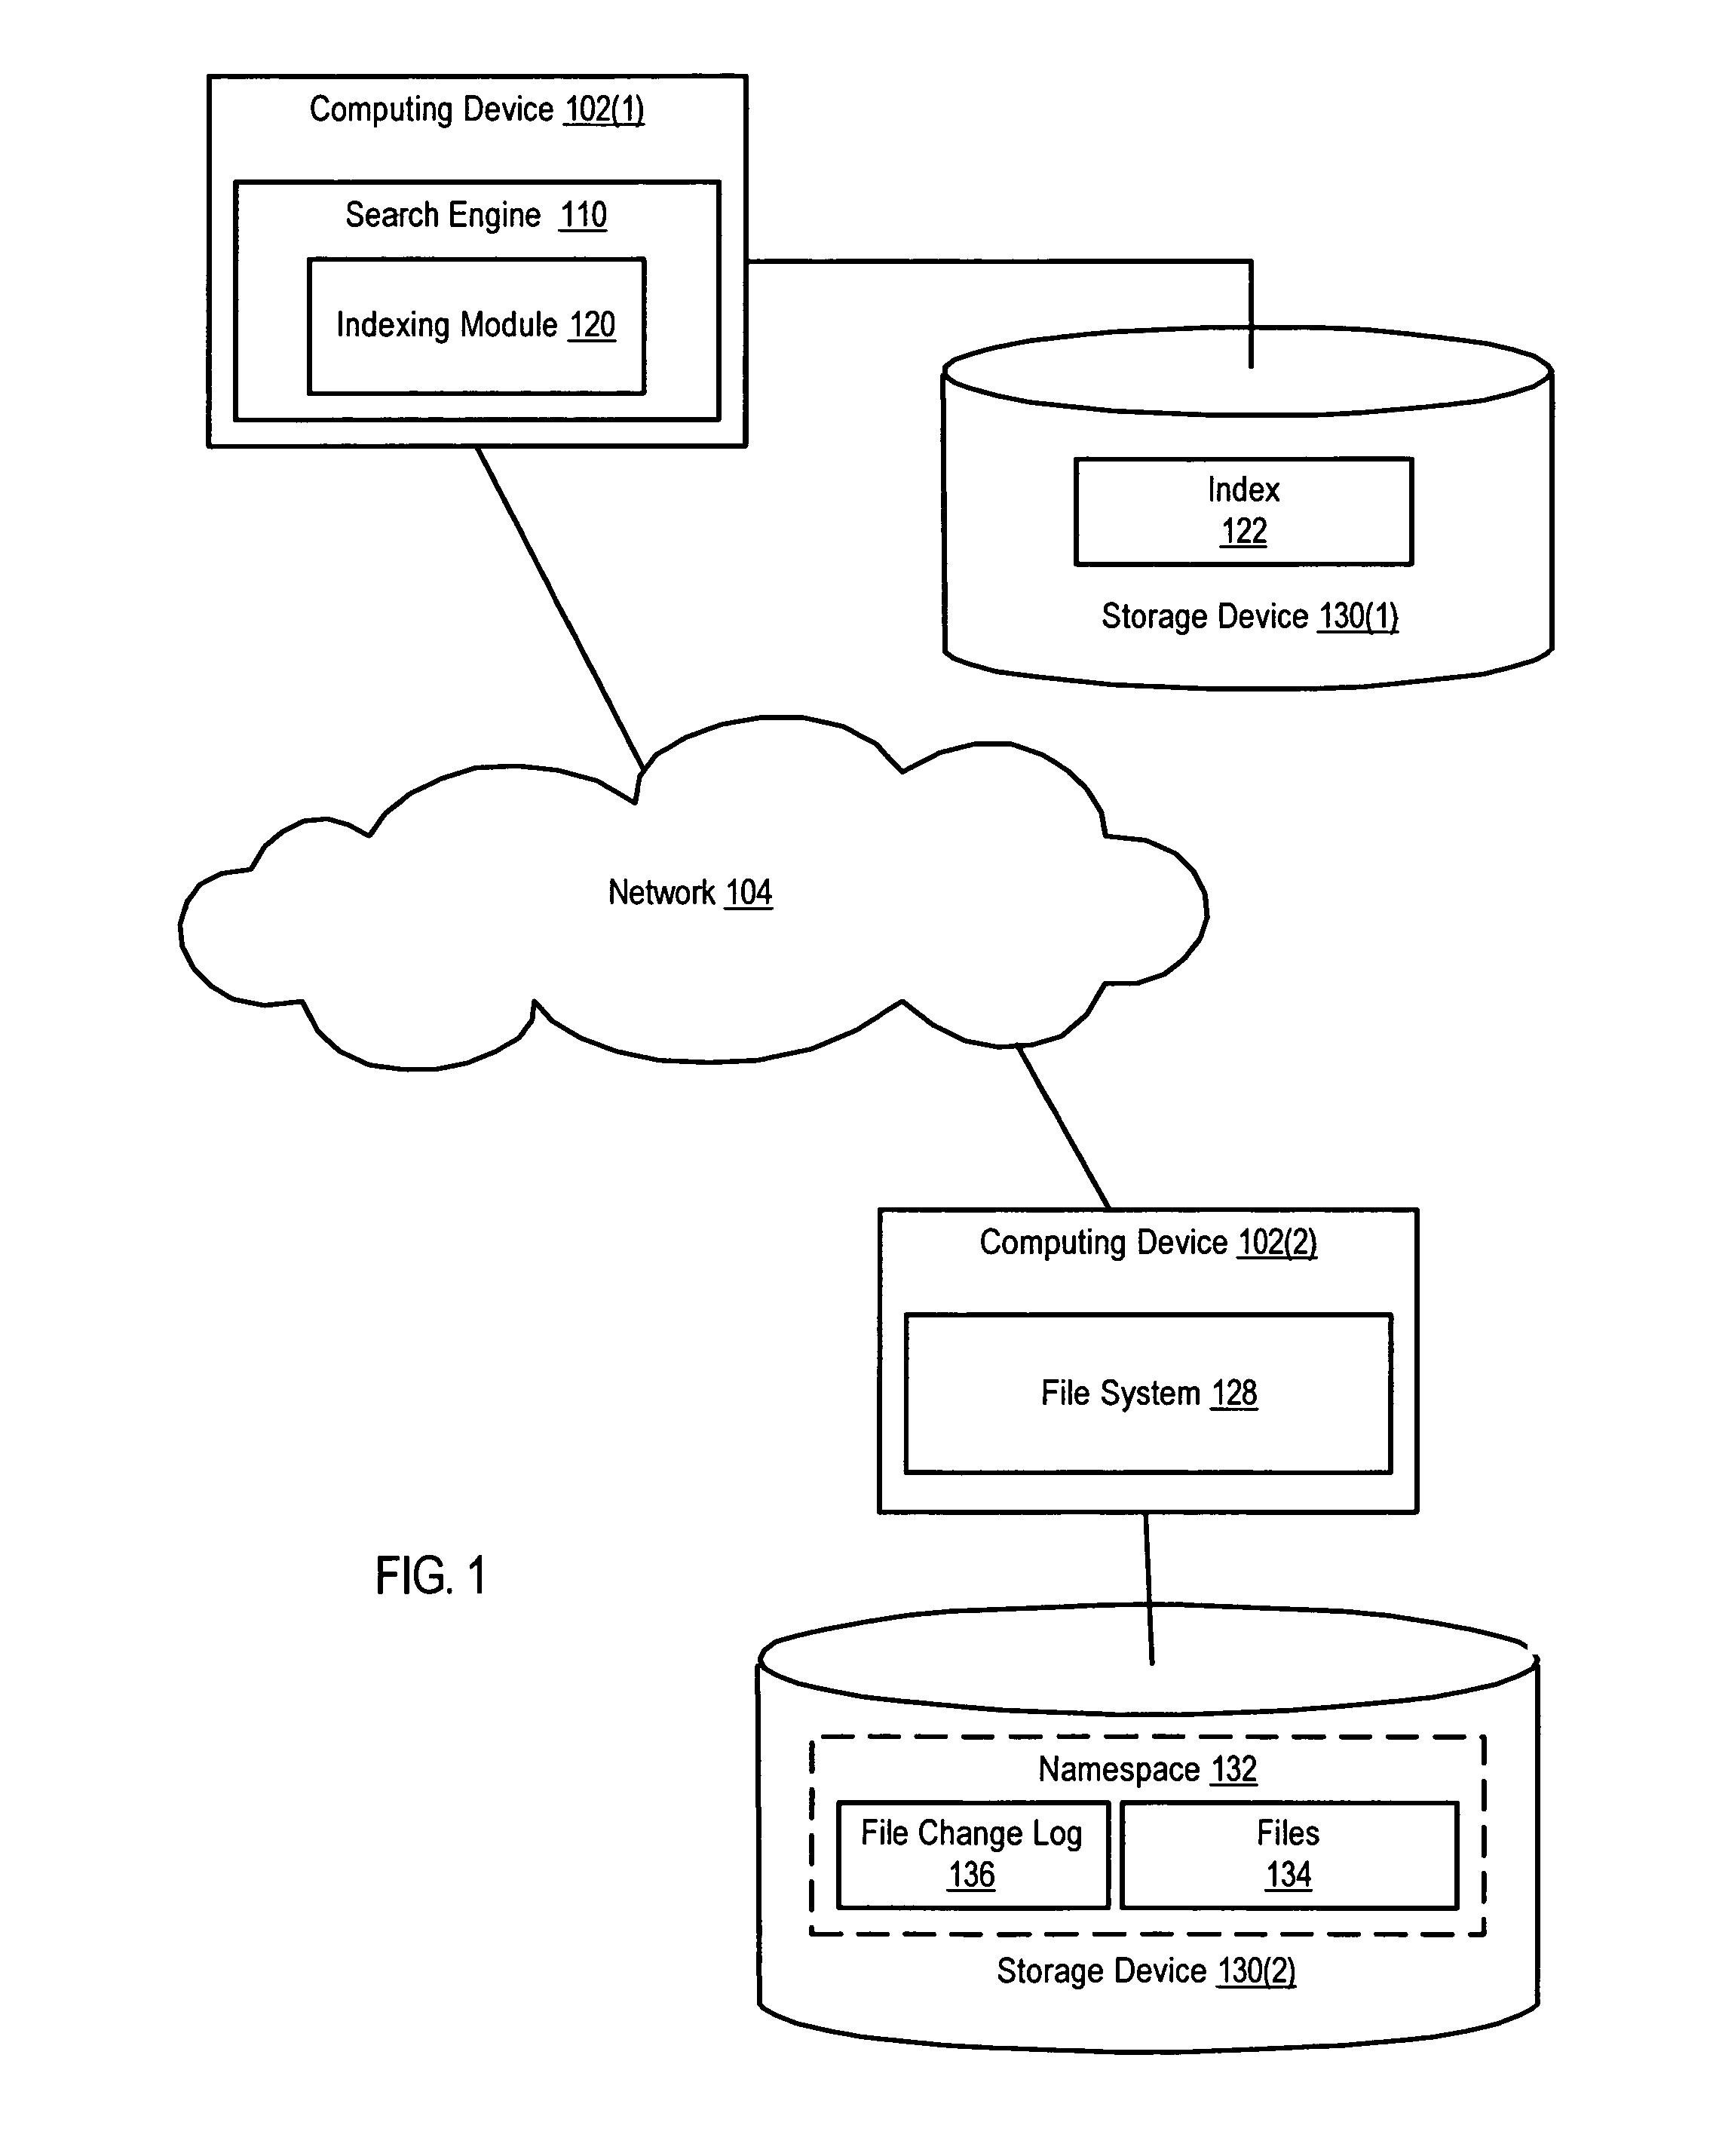 System and method for updating a search engine index based on which files are identified in a file change log